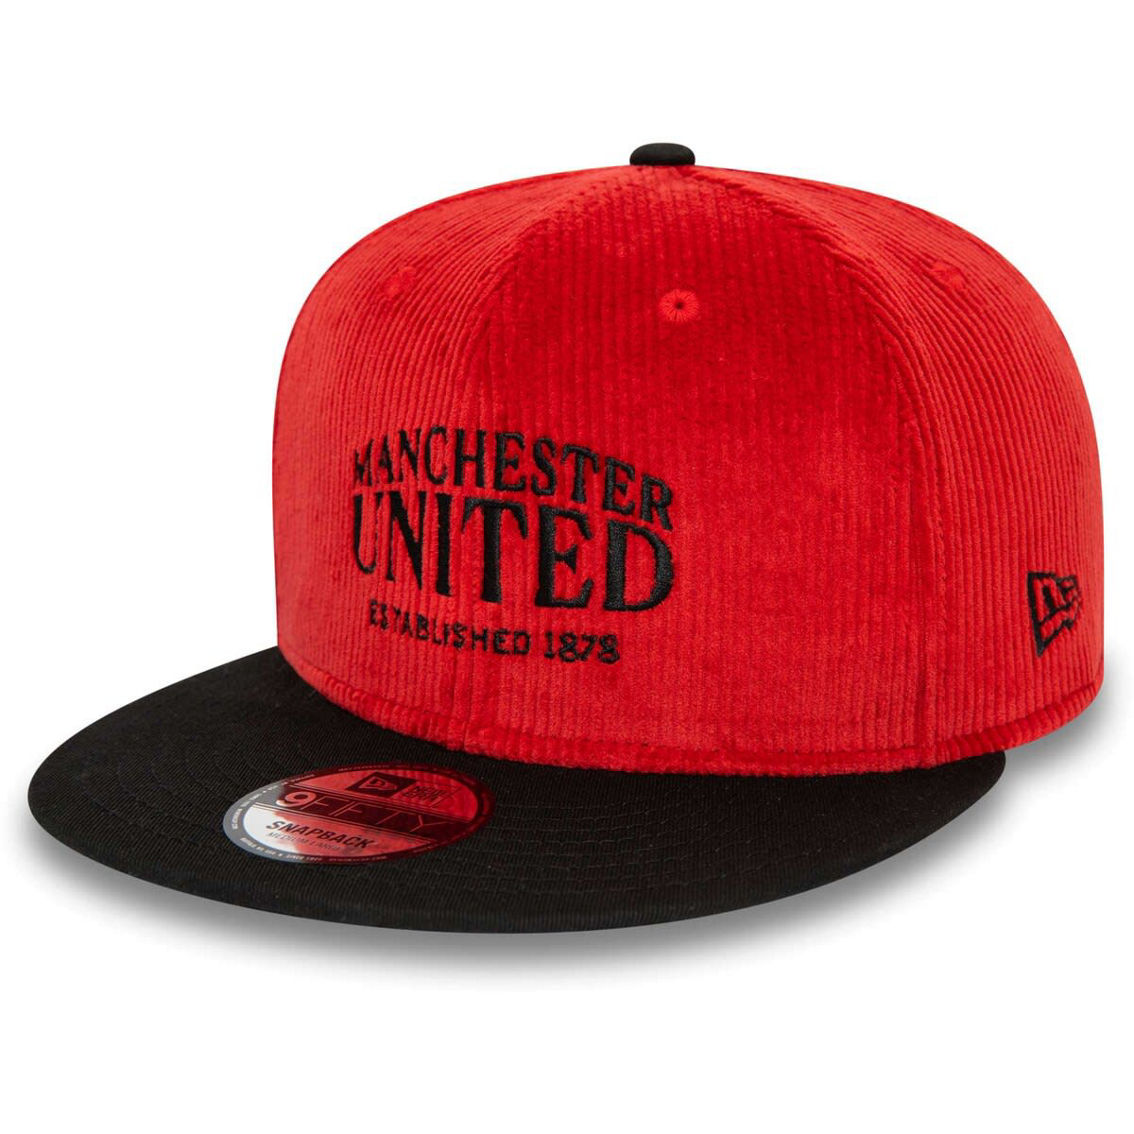 New Era Men's Red Manchester United Corduroy 9FIFTY Snapback Hat - Image 2 of 4